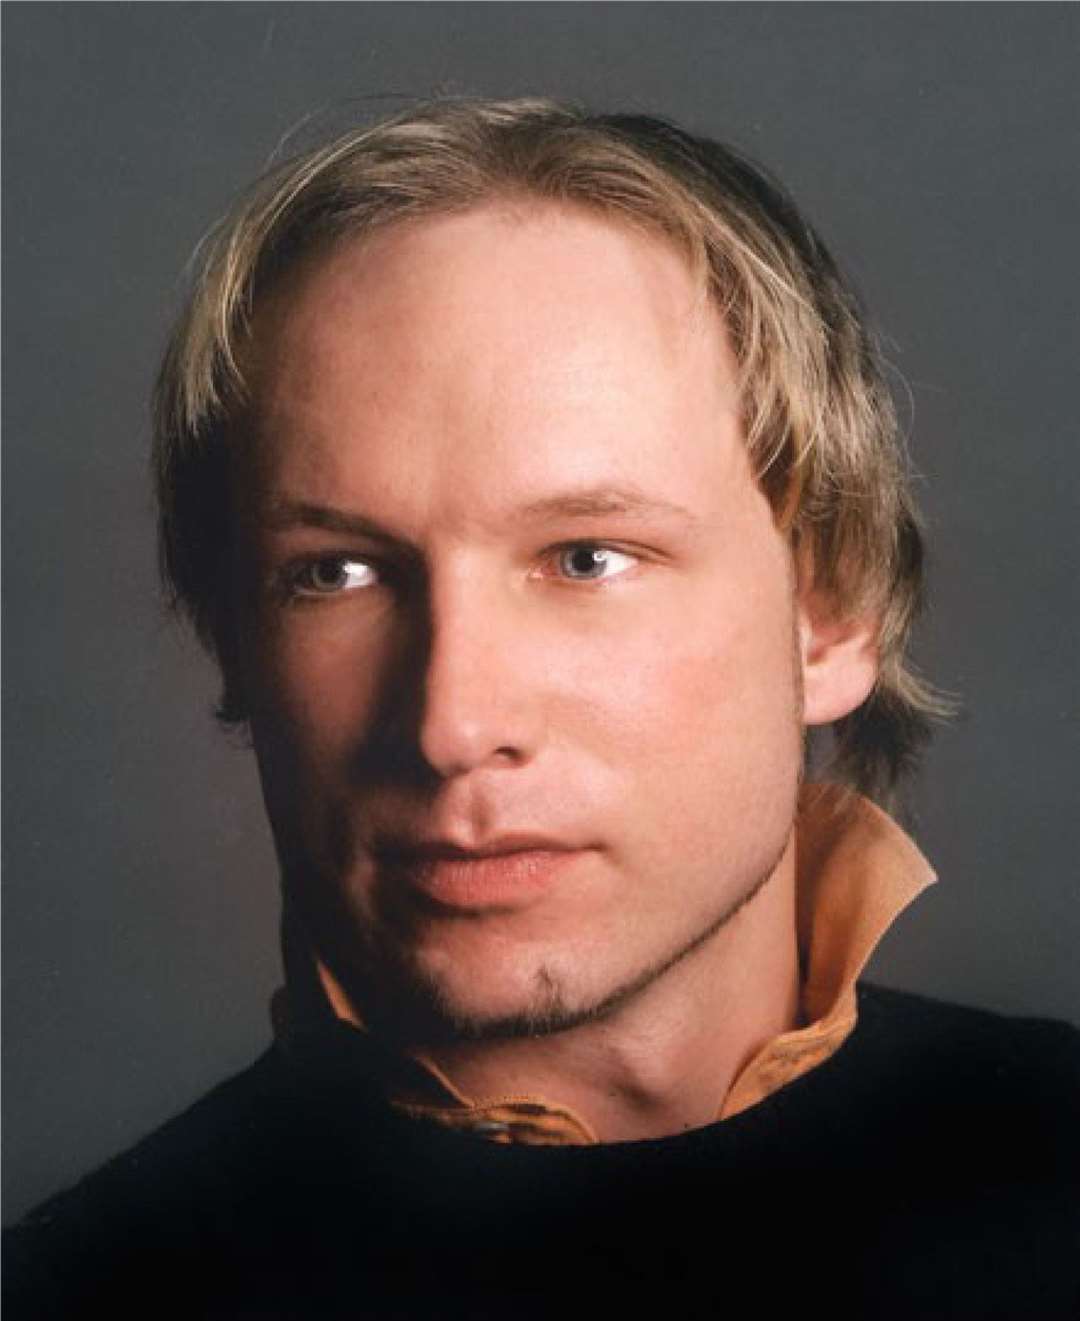 Image from the online manifesto of Anders Breivik who was responsible for a bomb attack and mass shooting in Norway in 2011 (PA)